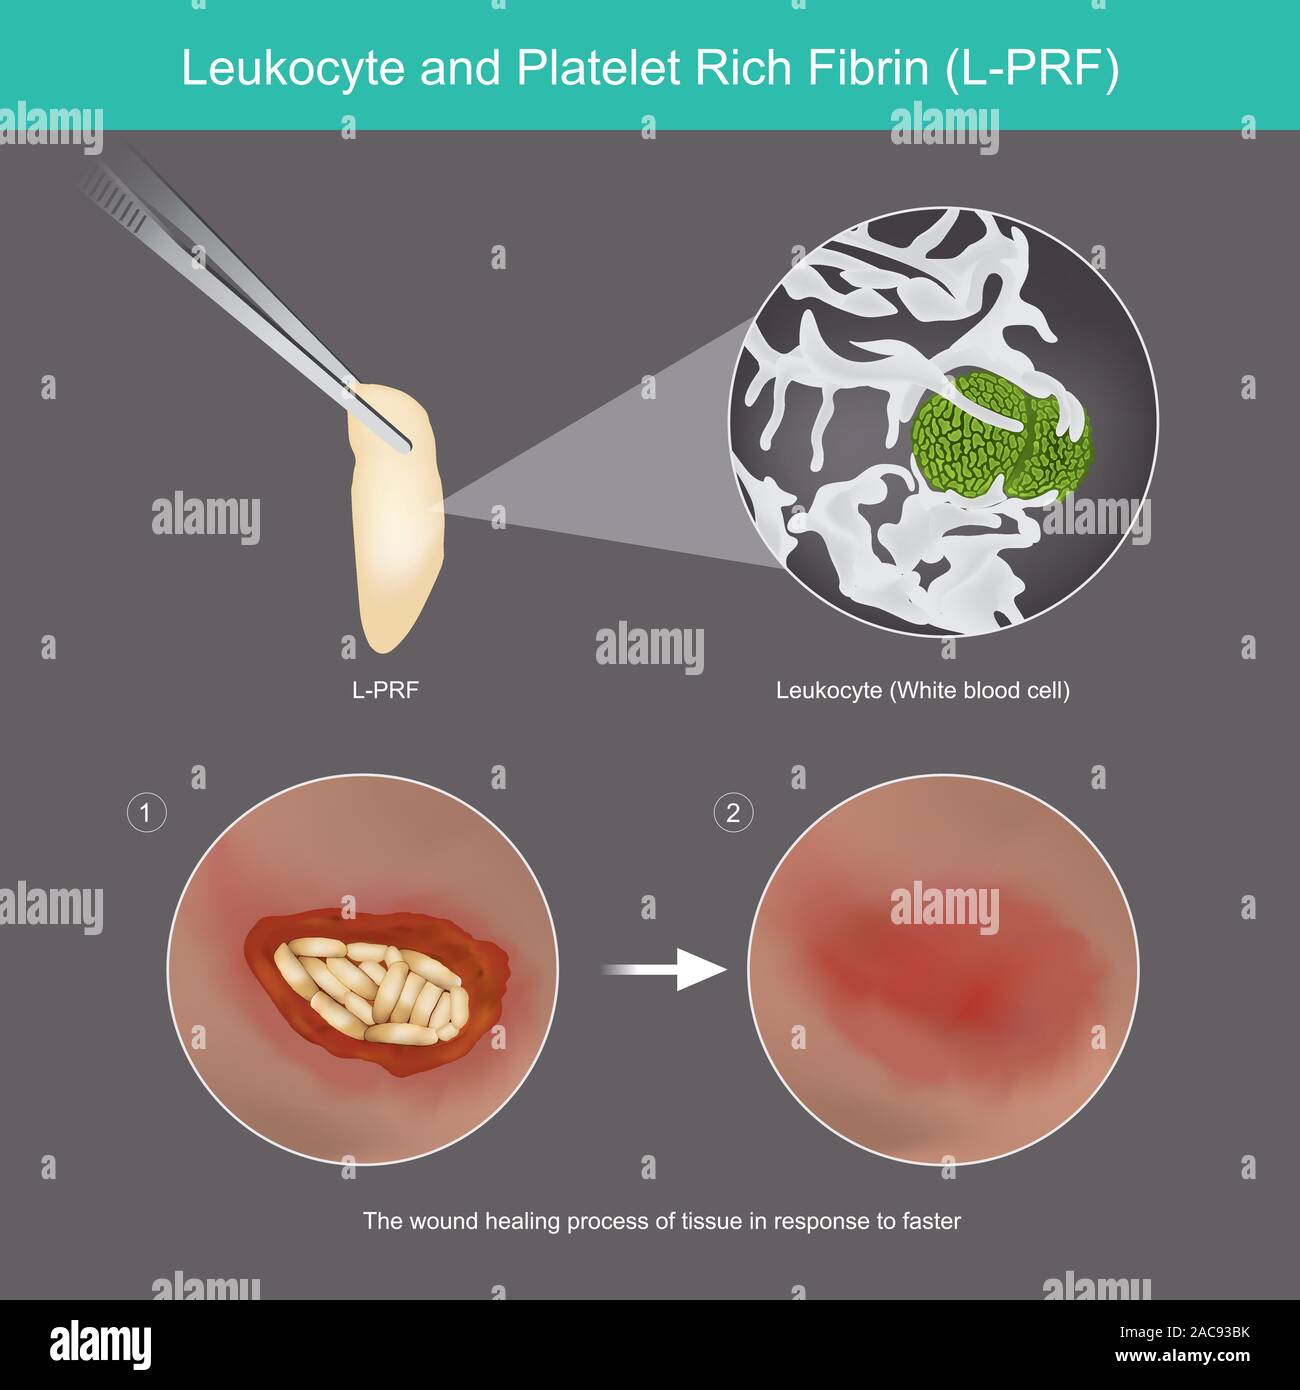 Leukocyte and Platelet Rich Fibrin. Illustration wound healing process of skin tissue by use  Leukocyte from platelet rich fibrin L-PRF. Stock Vector